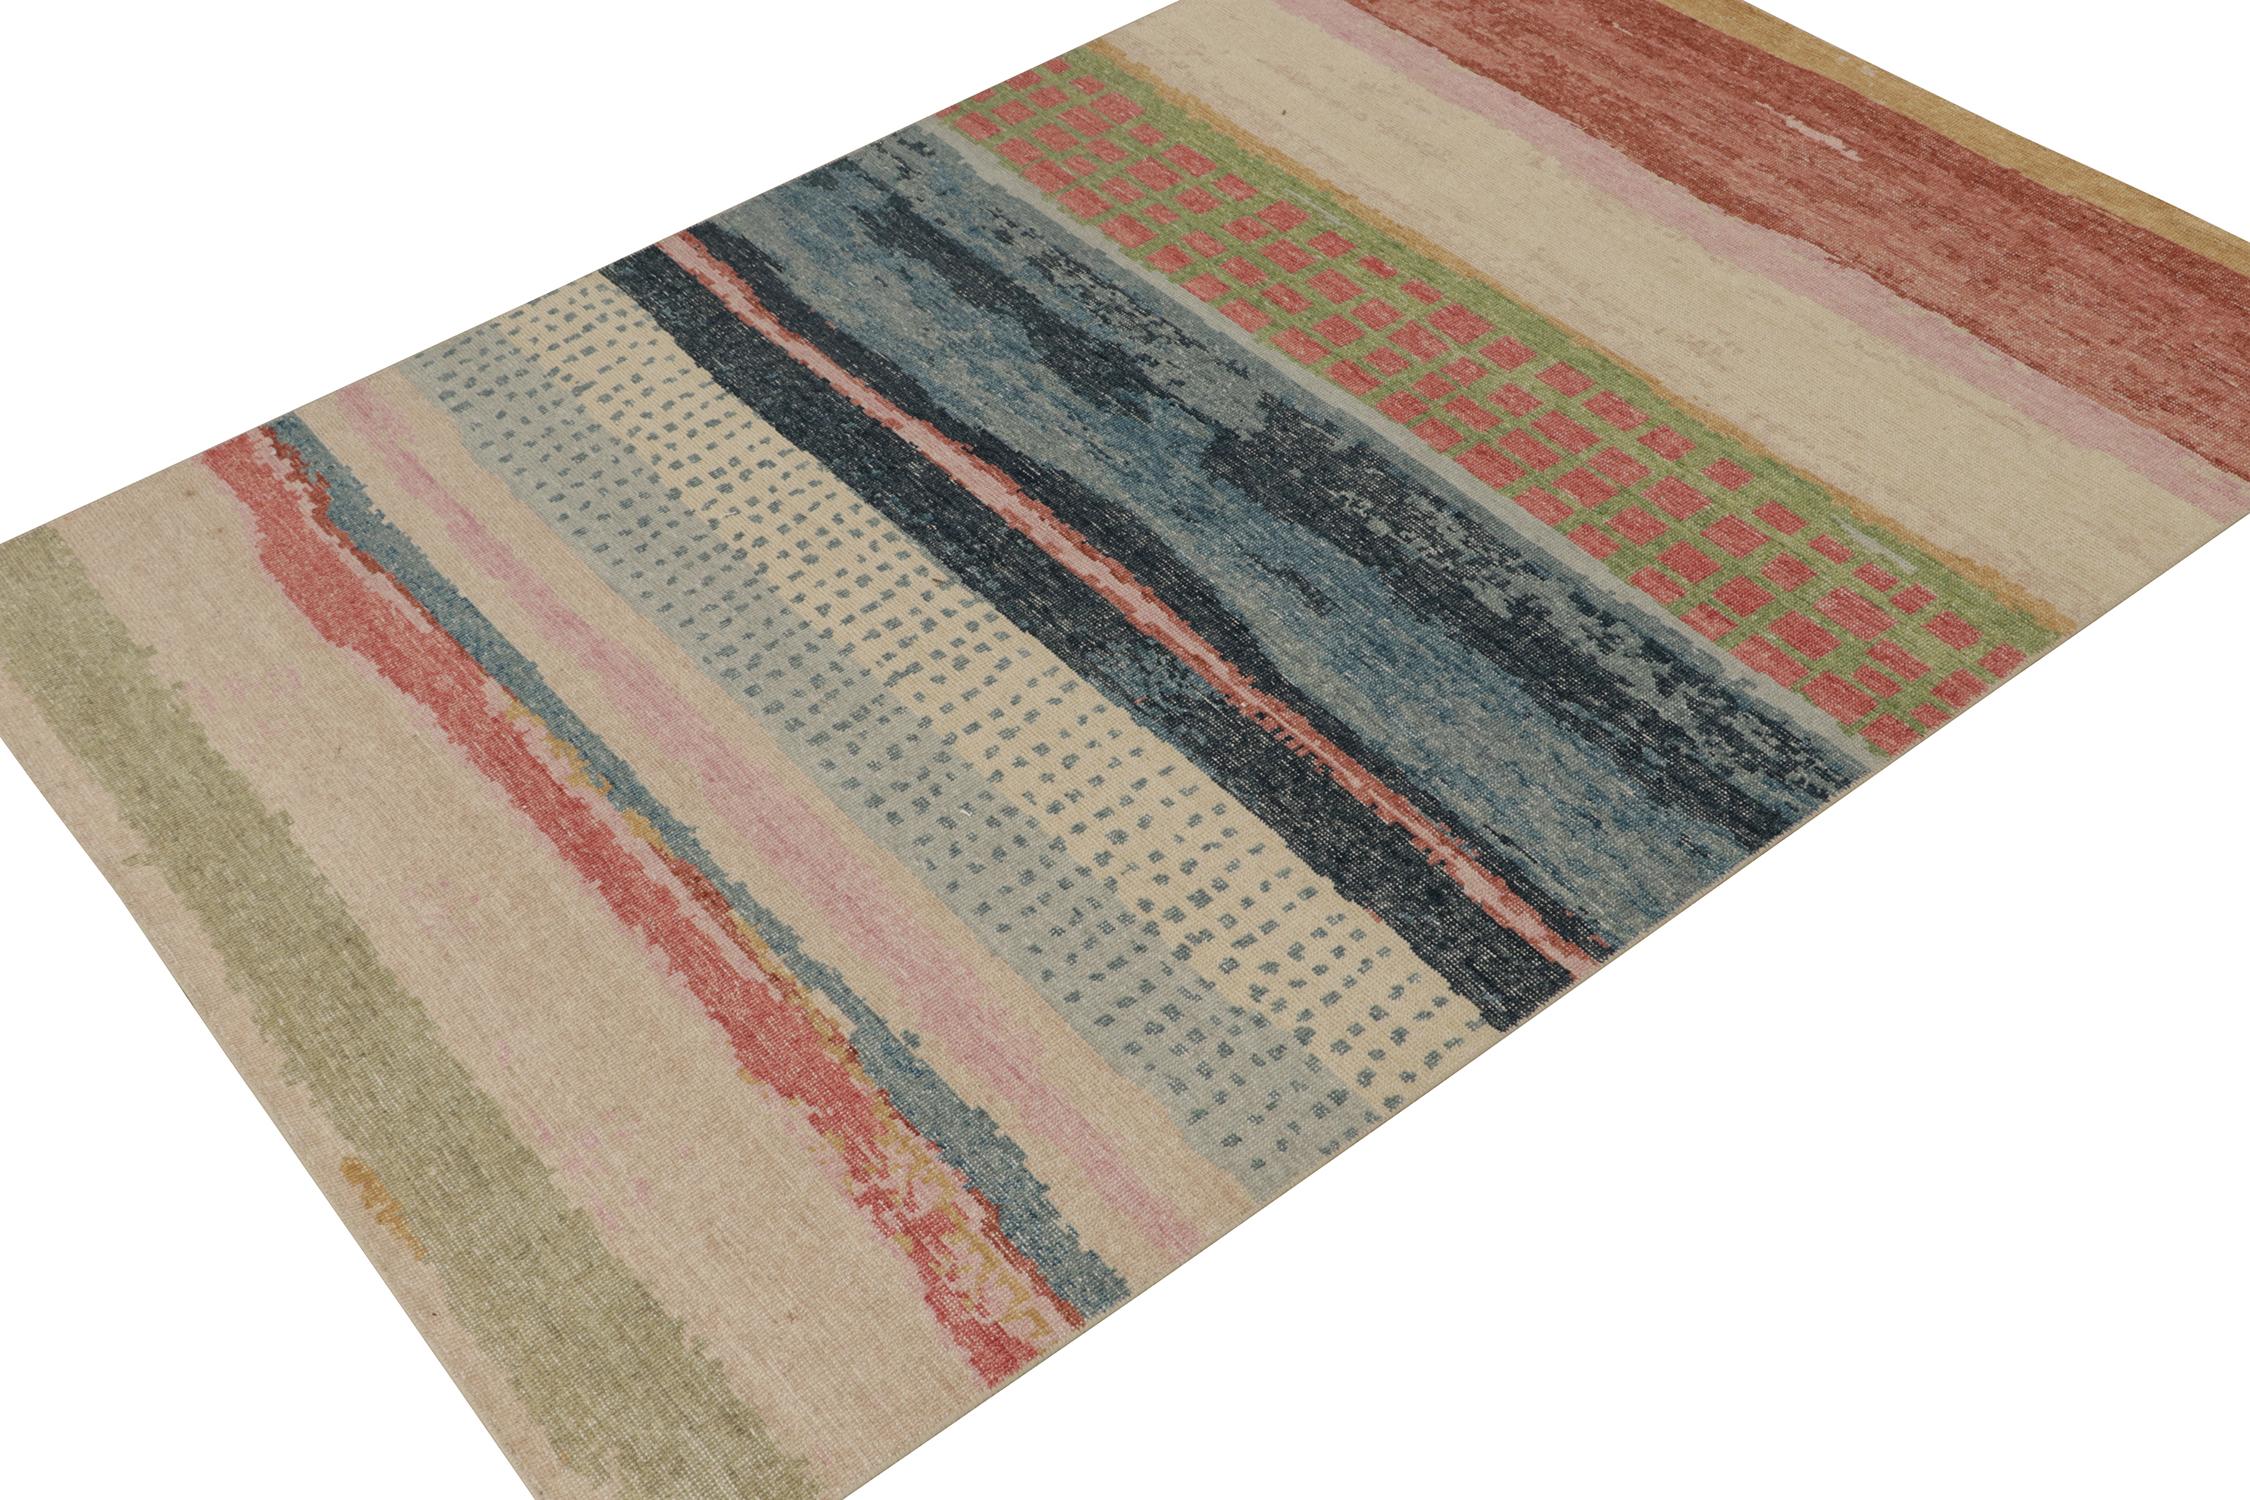 This contemporary 6x9 abstract rug is a new addition to the Homage Collection by Rug & Kilim. Hand-knotted in wool and cotton.

Further On the Design:

This design enjoys a splash of colors with horizontal stripes, dots, and other painterly patterns